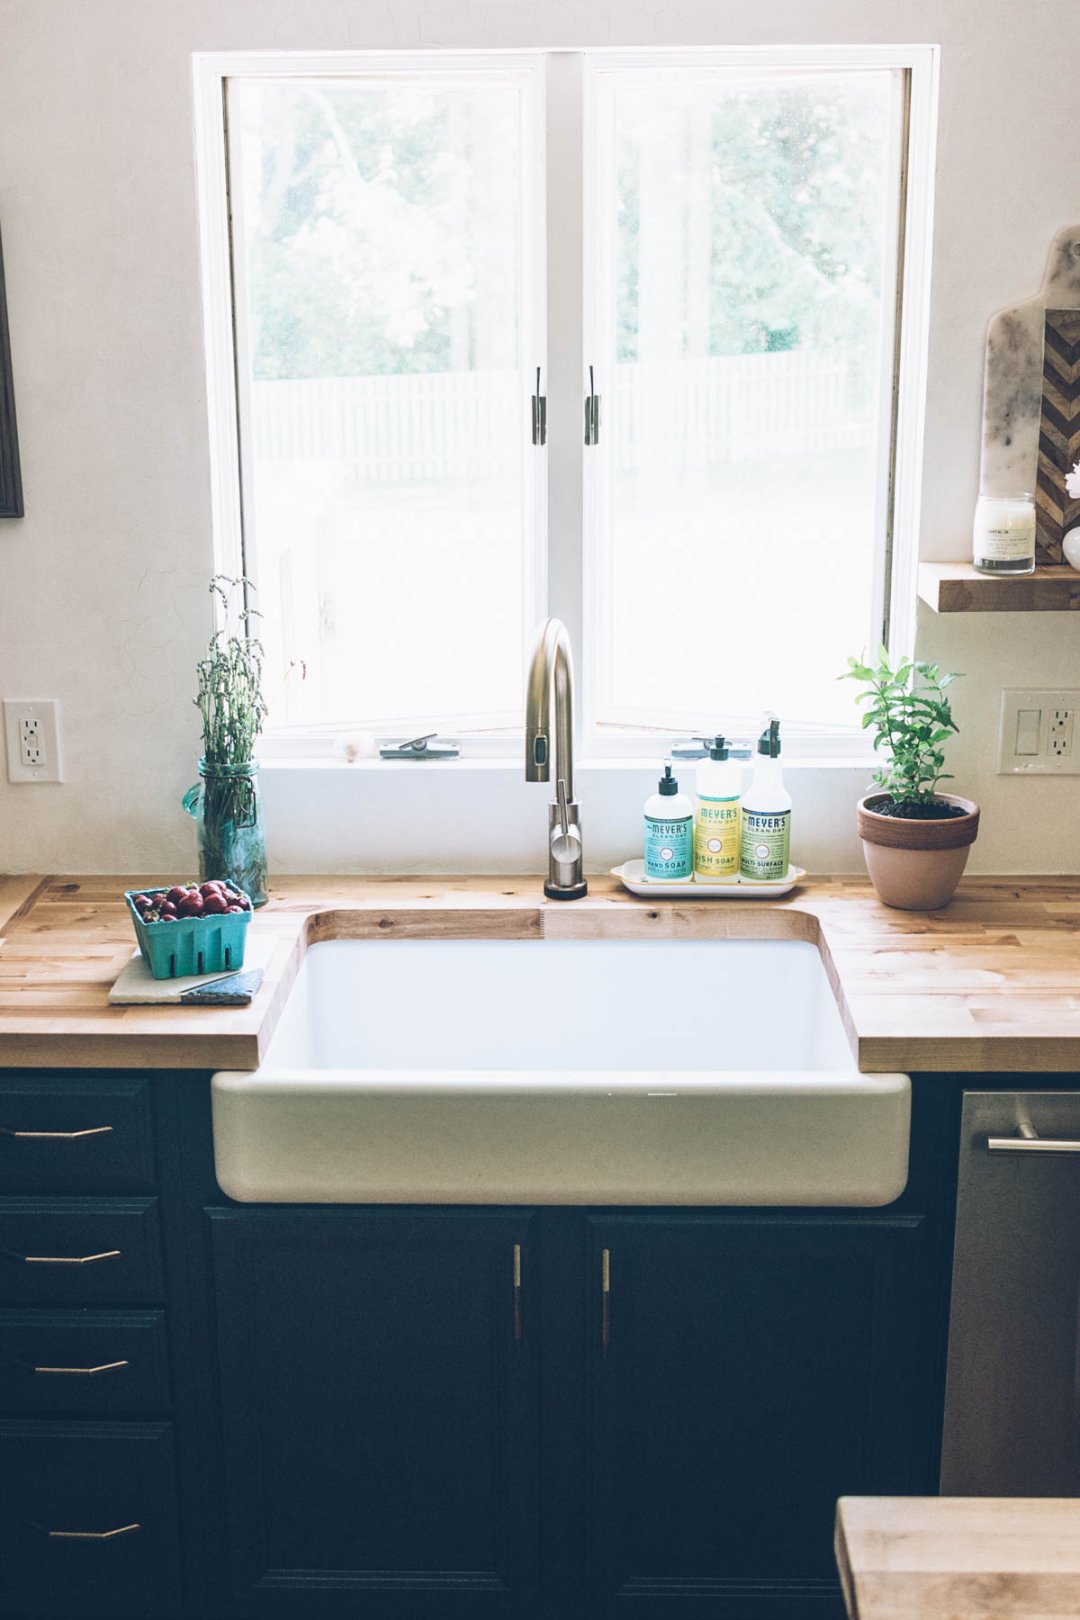 Jess Ann Kirby's kitchen renovation with new farmhouse sink and Delta champagne bronze faucet